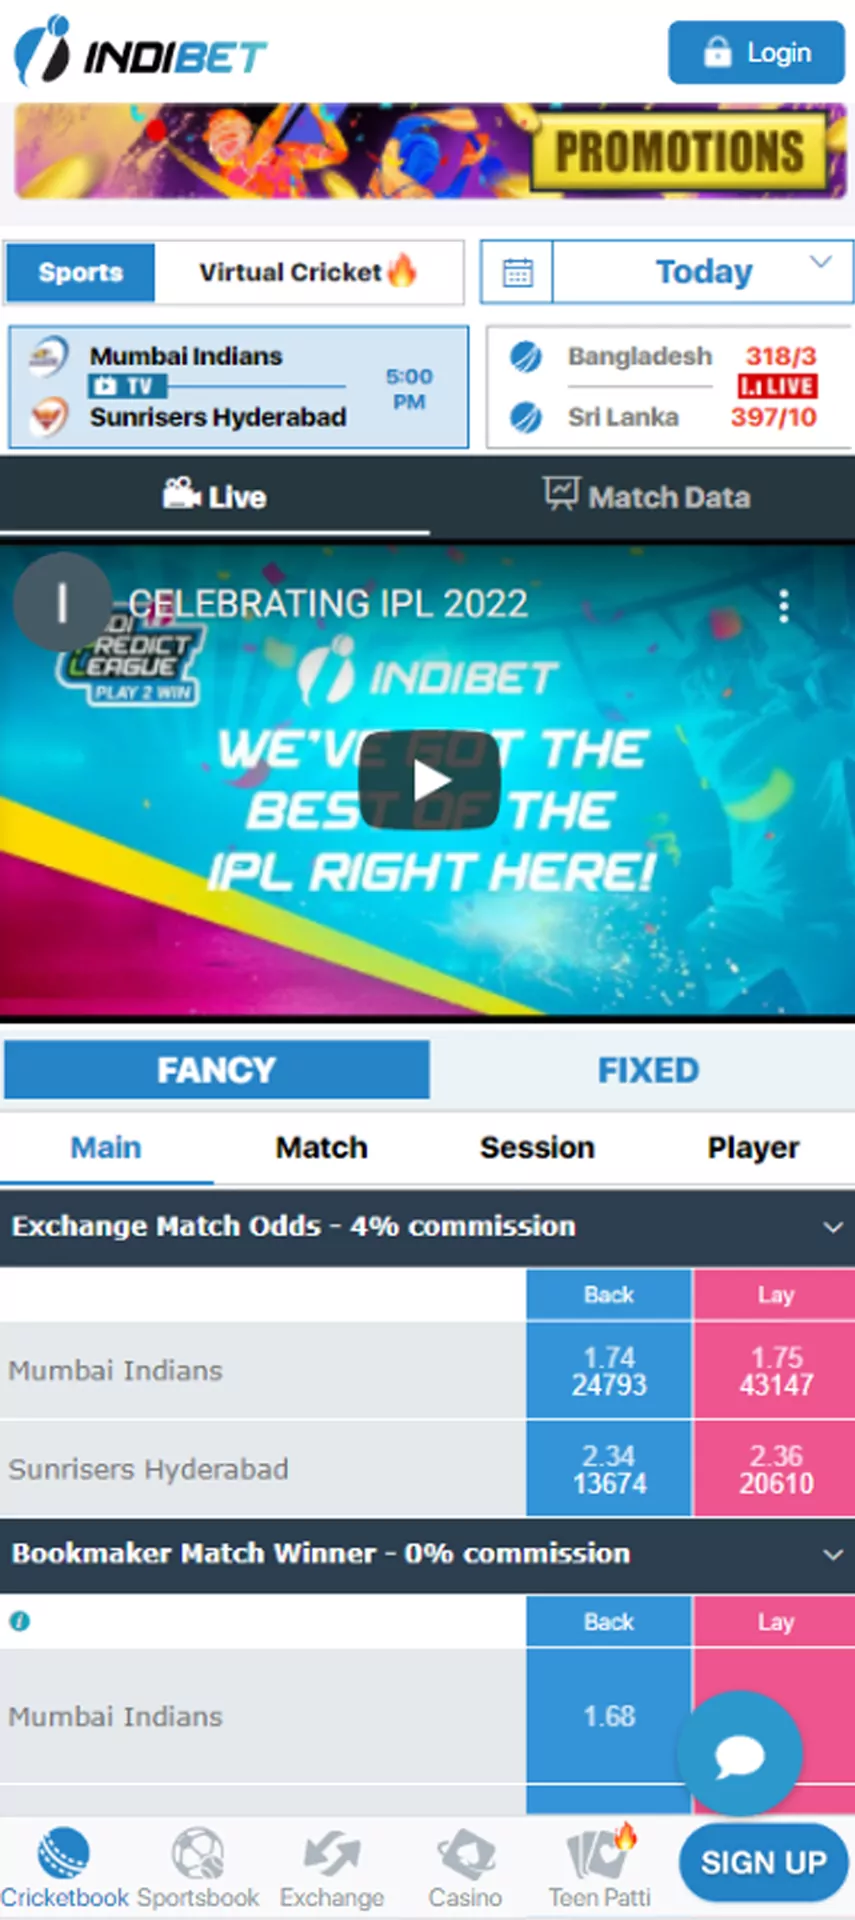 Indibet app main screen include all popular tournaments and outcomes, so you will never skip your favorite matches.